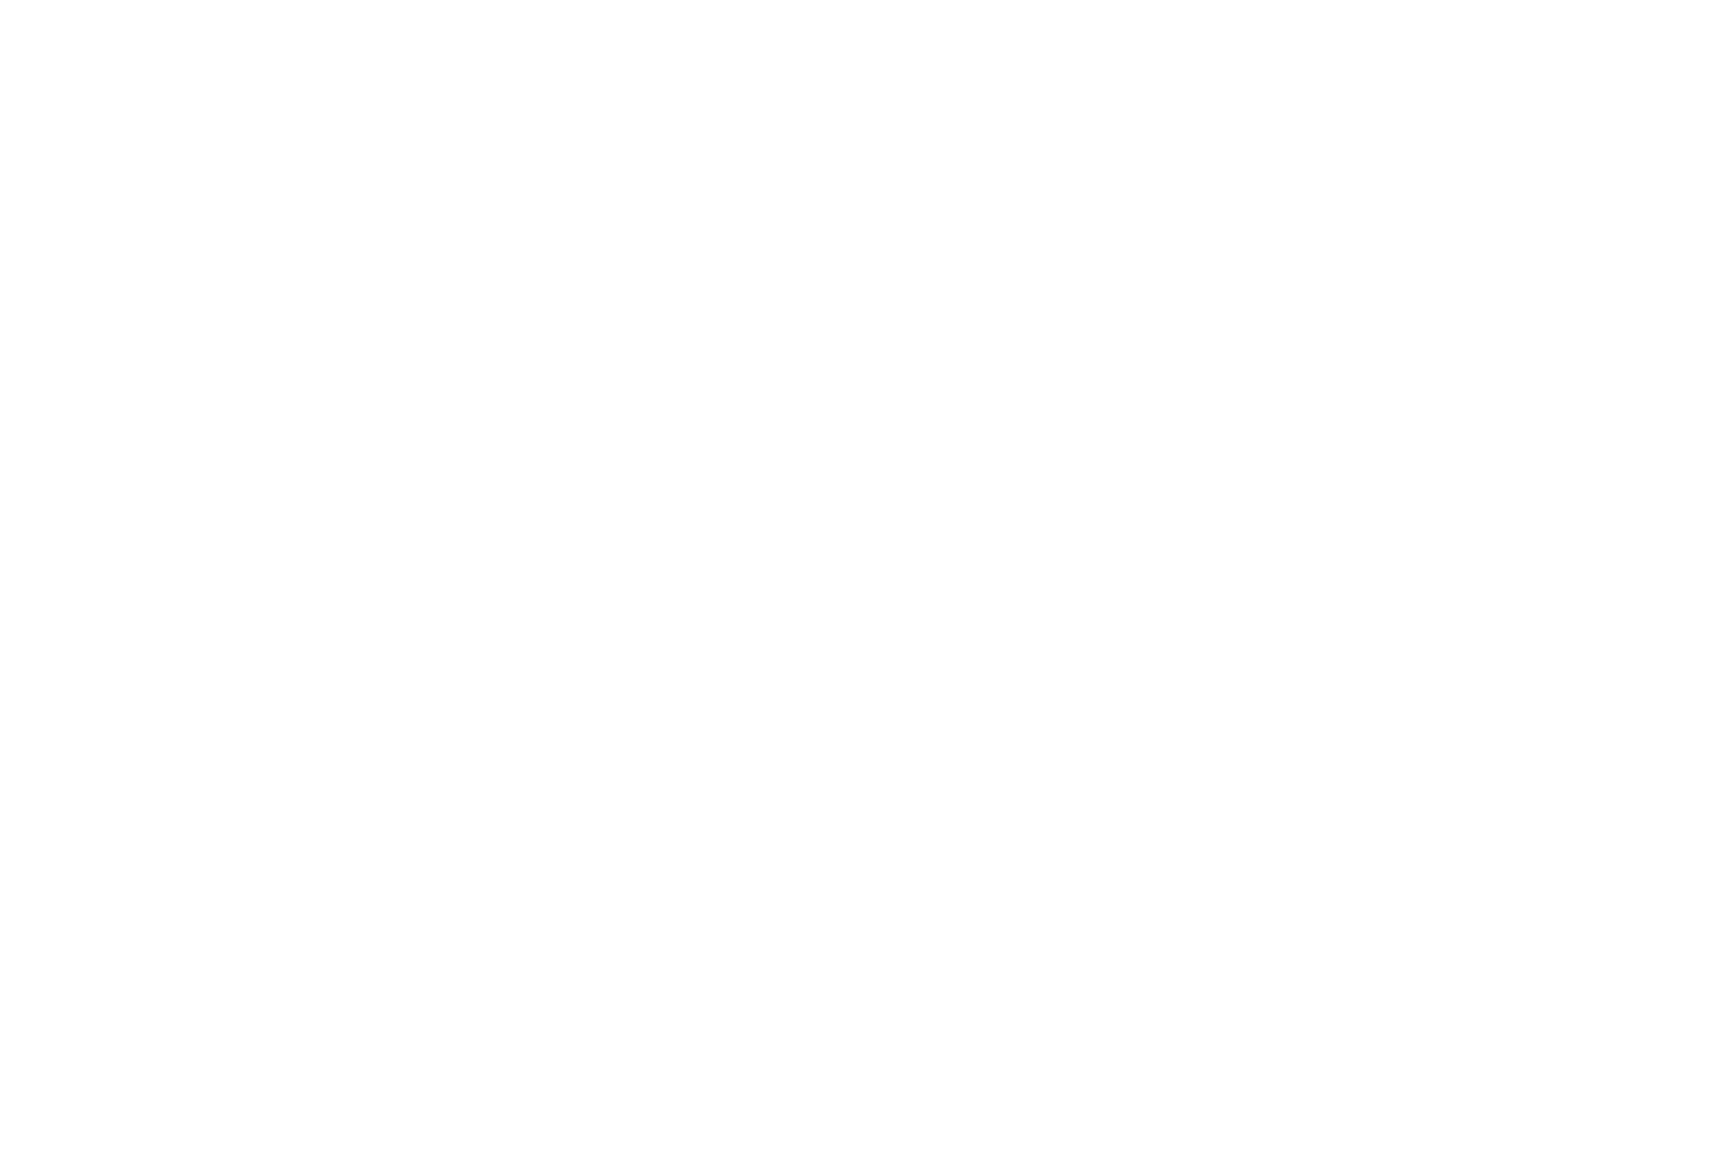 BEST DIRECTOR HONORABLE MENTION - TOYKO SHORT FILM FESTIVAL - ONEFIFTY - XTC